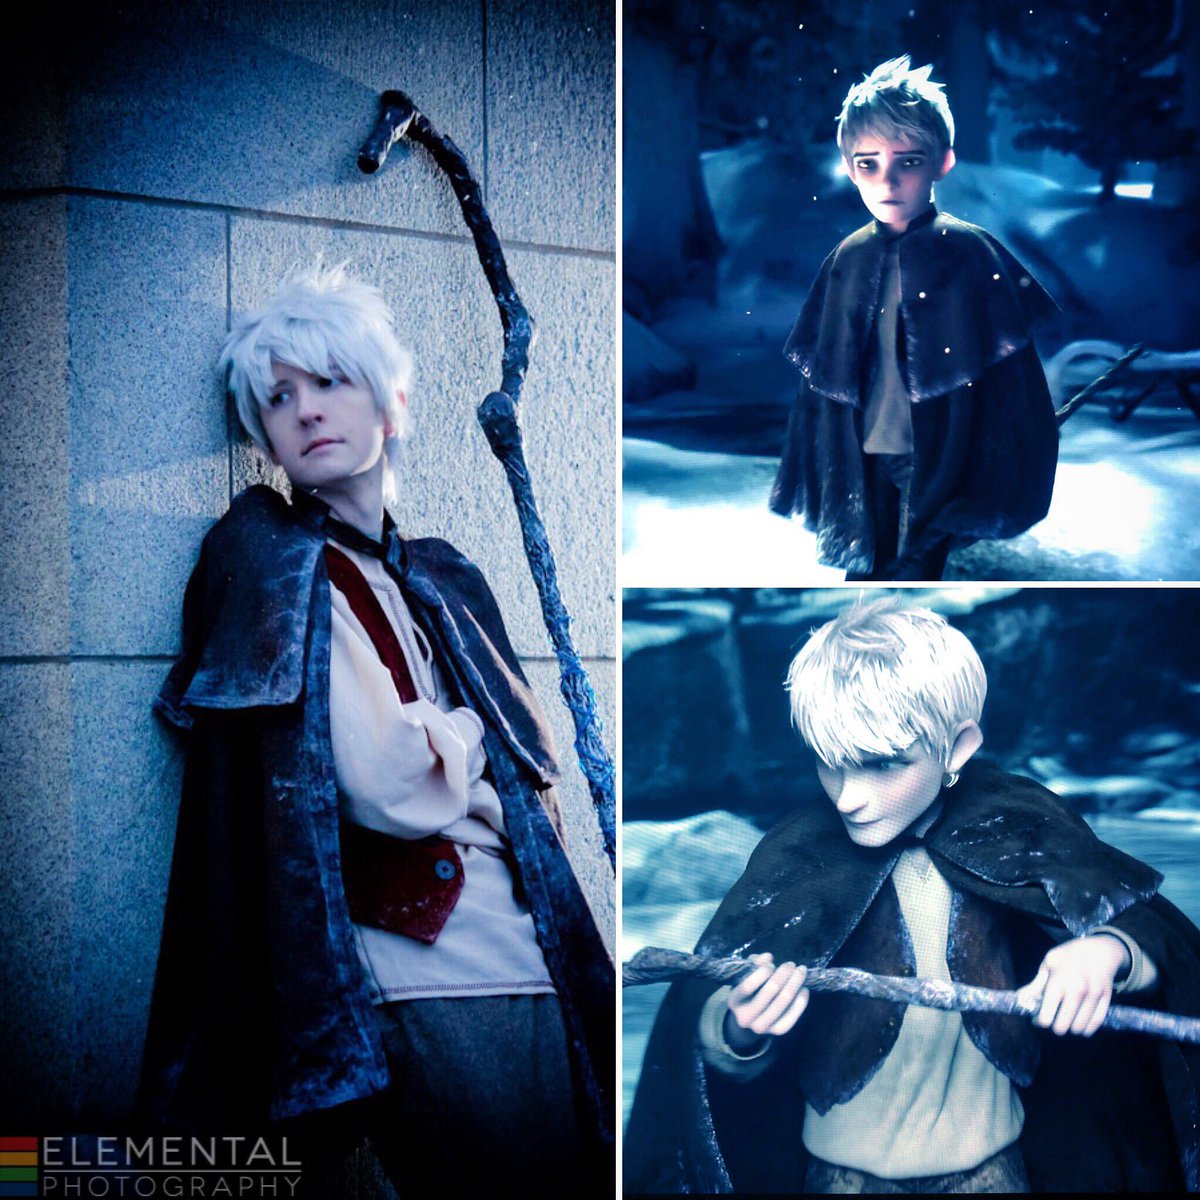 Getting cold outside so how about some Jack Frost #sidebysidecosplay 
#cosplay #jackfrost #riseoftheguardians #jackfrostcosplay #riseoftheguardianscosplay #cosplaysidebyside